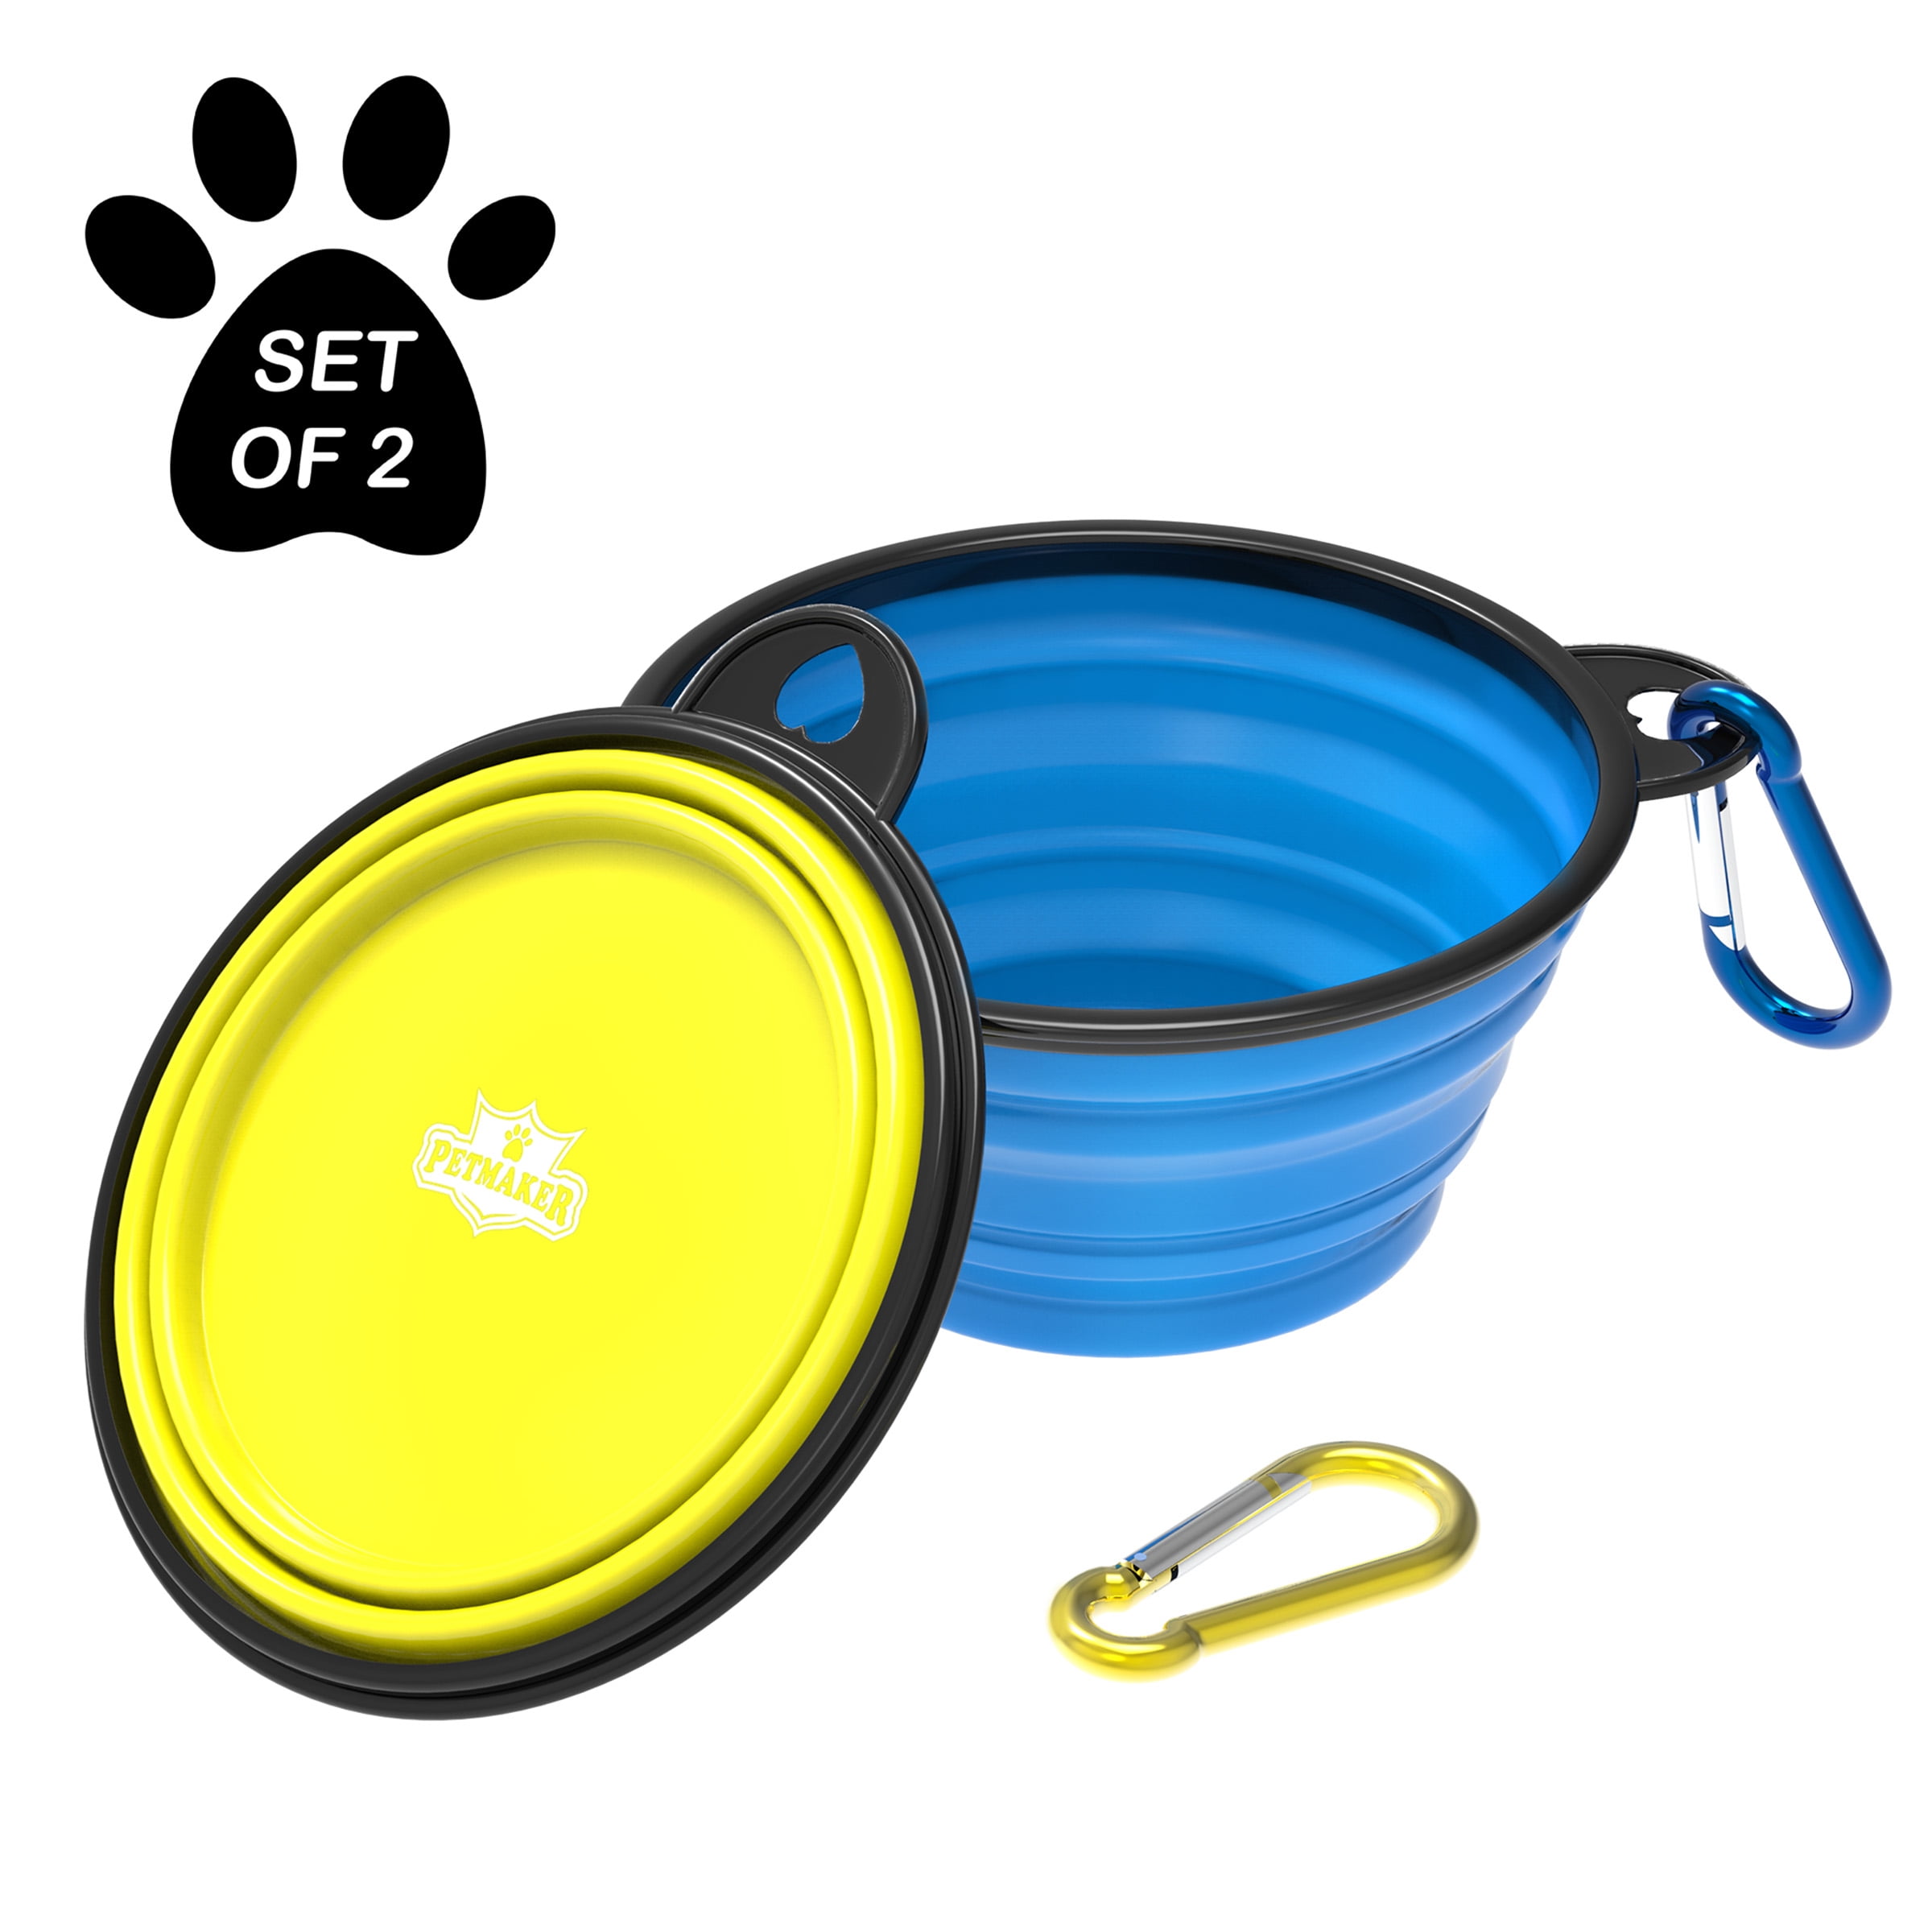 Traveling,Hiking Blue+Red Collapsible Dog Bowls for Travel 2 Pack,Dog Portable Water Bowl for Cats Pet Foldable Feeding Watering Dish,Food Bowls with Carabiner Clip for Walking 